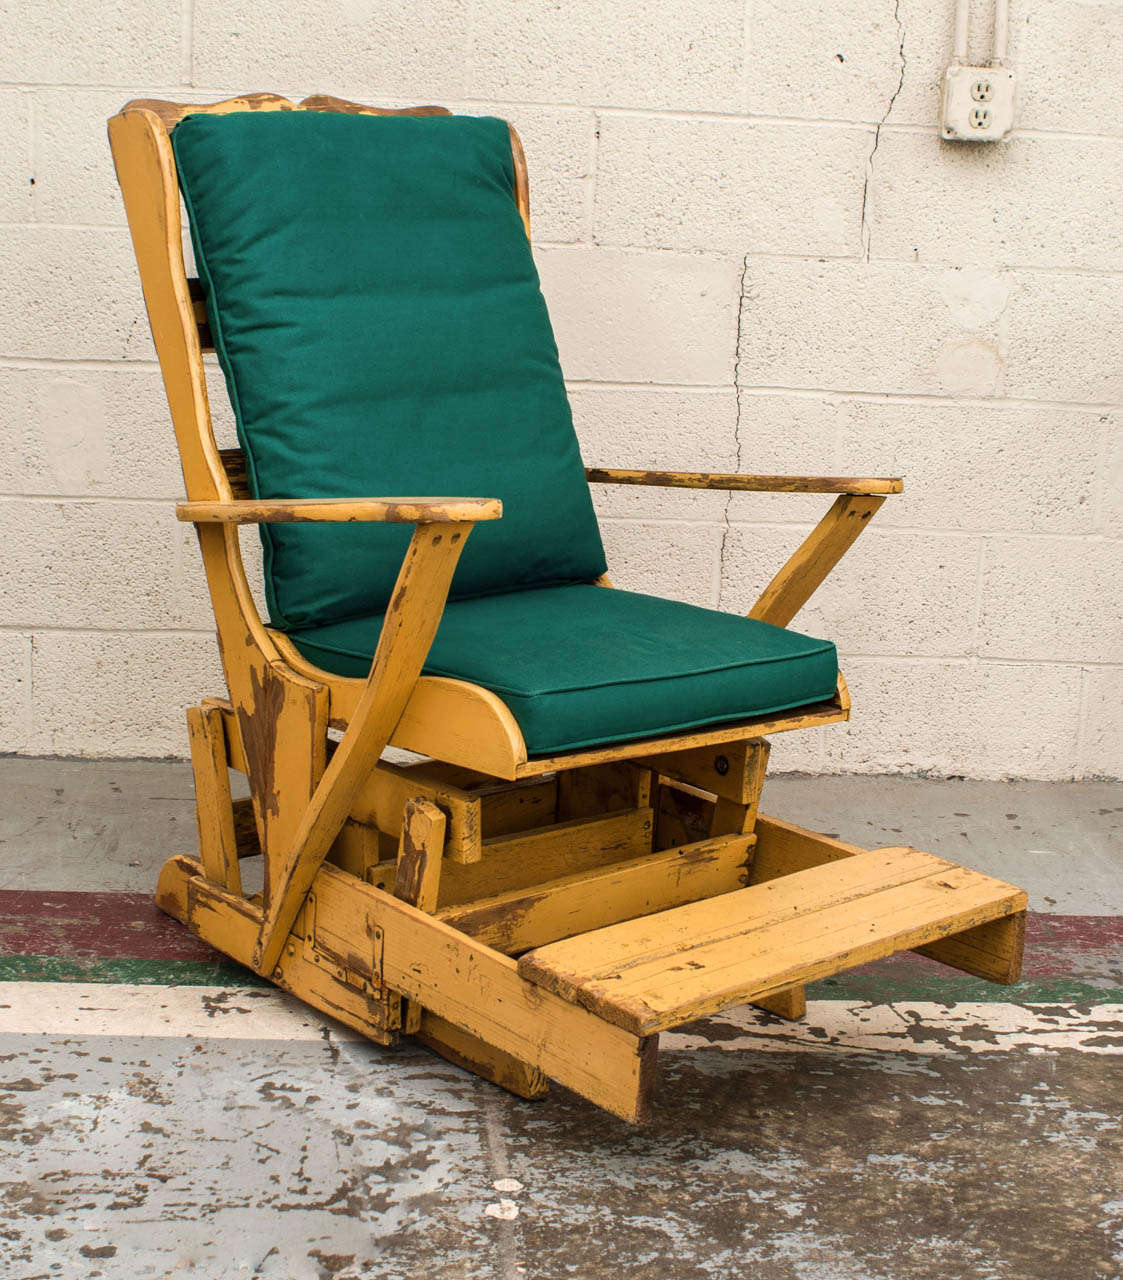 A beautiful and unusual beechwood glider in wonderfully distressed original mustard paint featuring a slatted seat and back and with a very smooth action.  Great for relaxing in a covered porch. New cushions included.